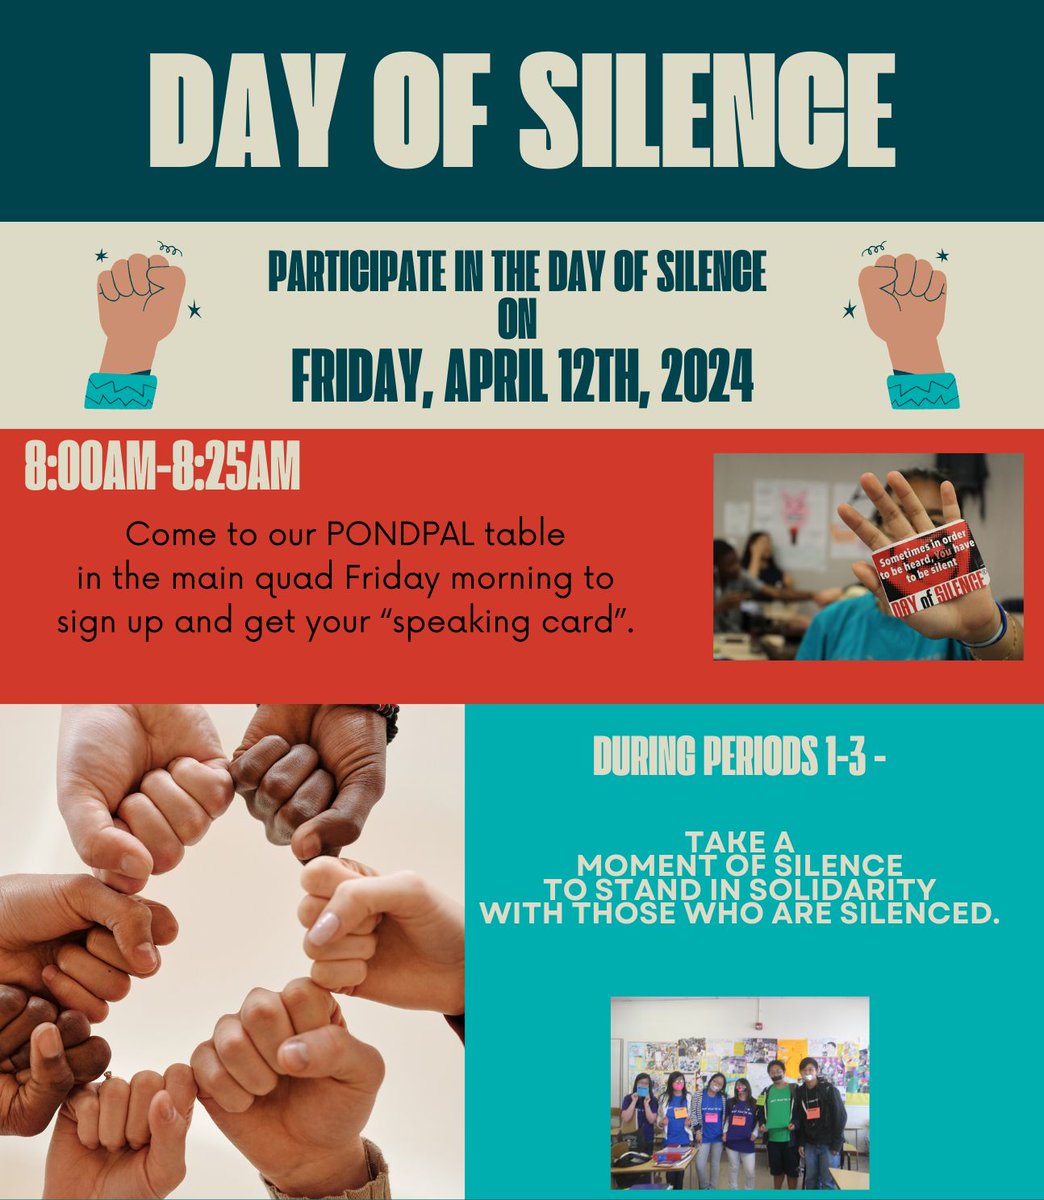 National Day of Silence a student-led movement to protest bullying & harassment of LGBT students & those who support them. This day brings awareness & illustrates to the schools how intimidation, name-calling, and general bullying have a silencing effect. #LikeAPio